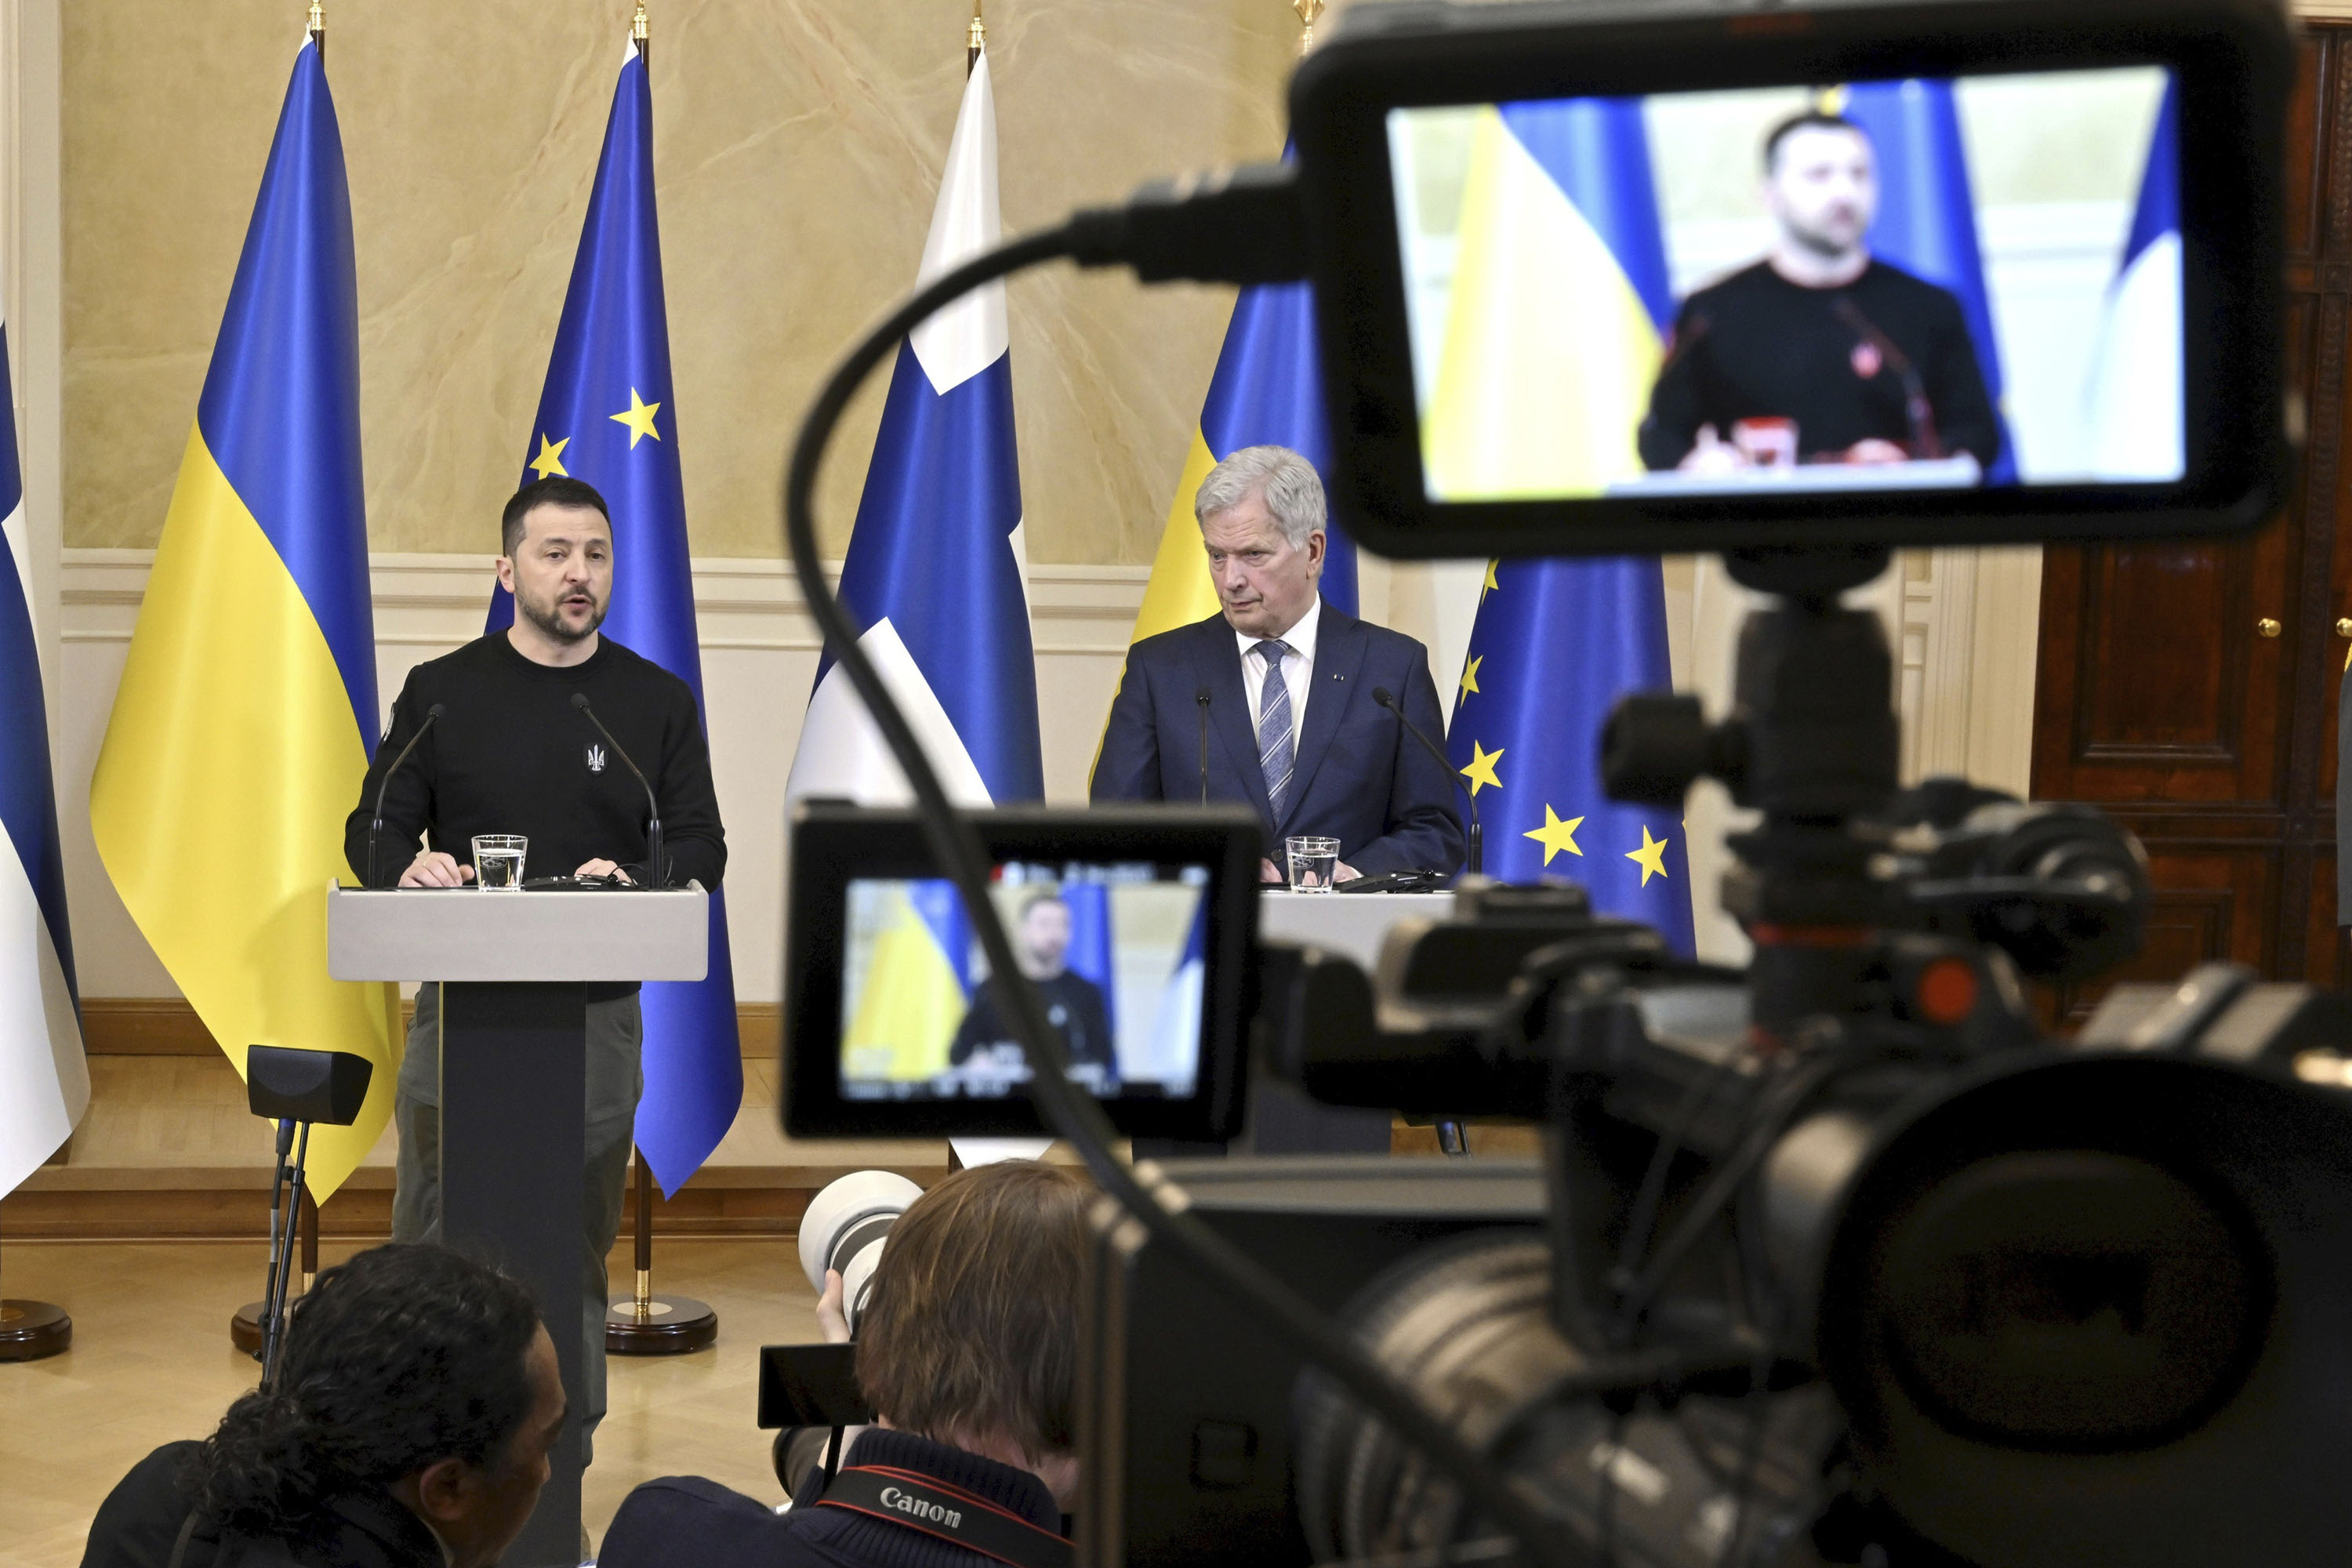 Ukrainian President Volodymyr Zelenskyy, left, and Finnish President Sauli Niinisto address the media during a joint press conference at the Presidential Palace in Helsinki, Finland, on Wednesday, May 3. 